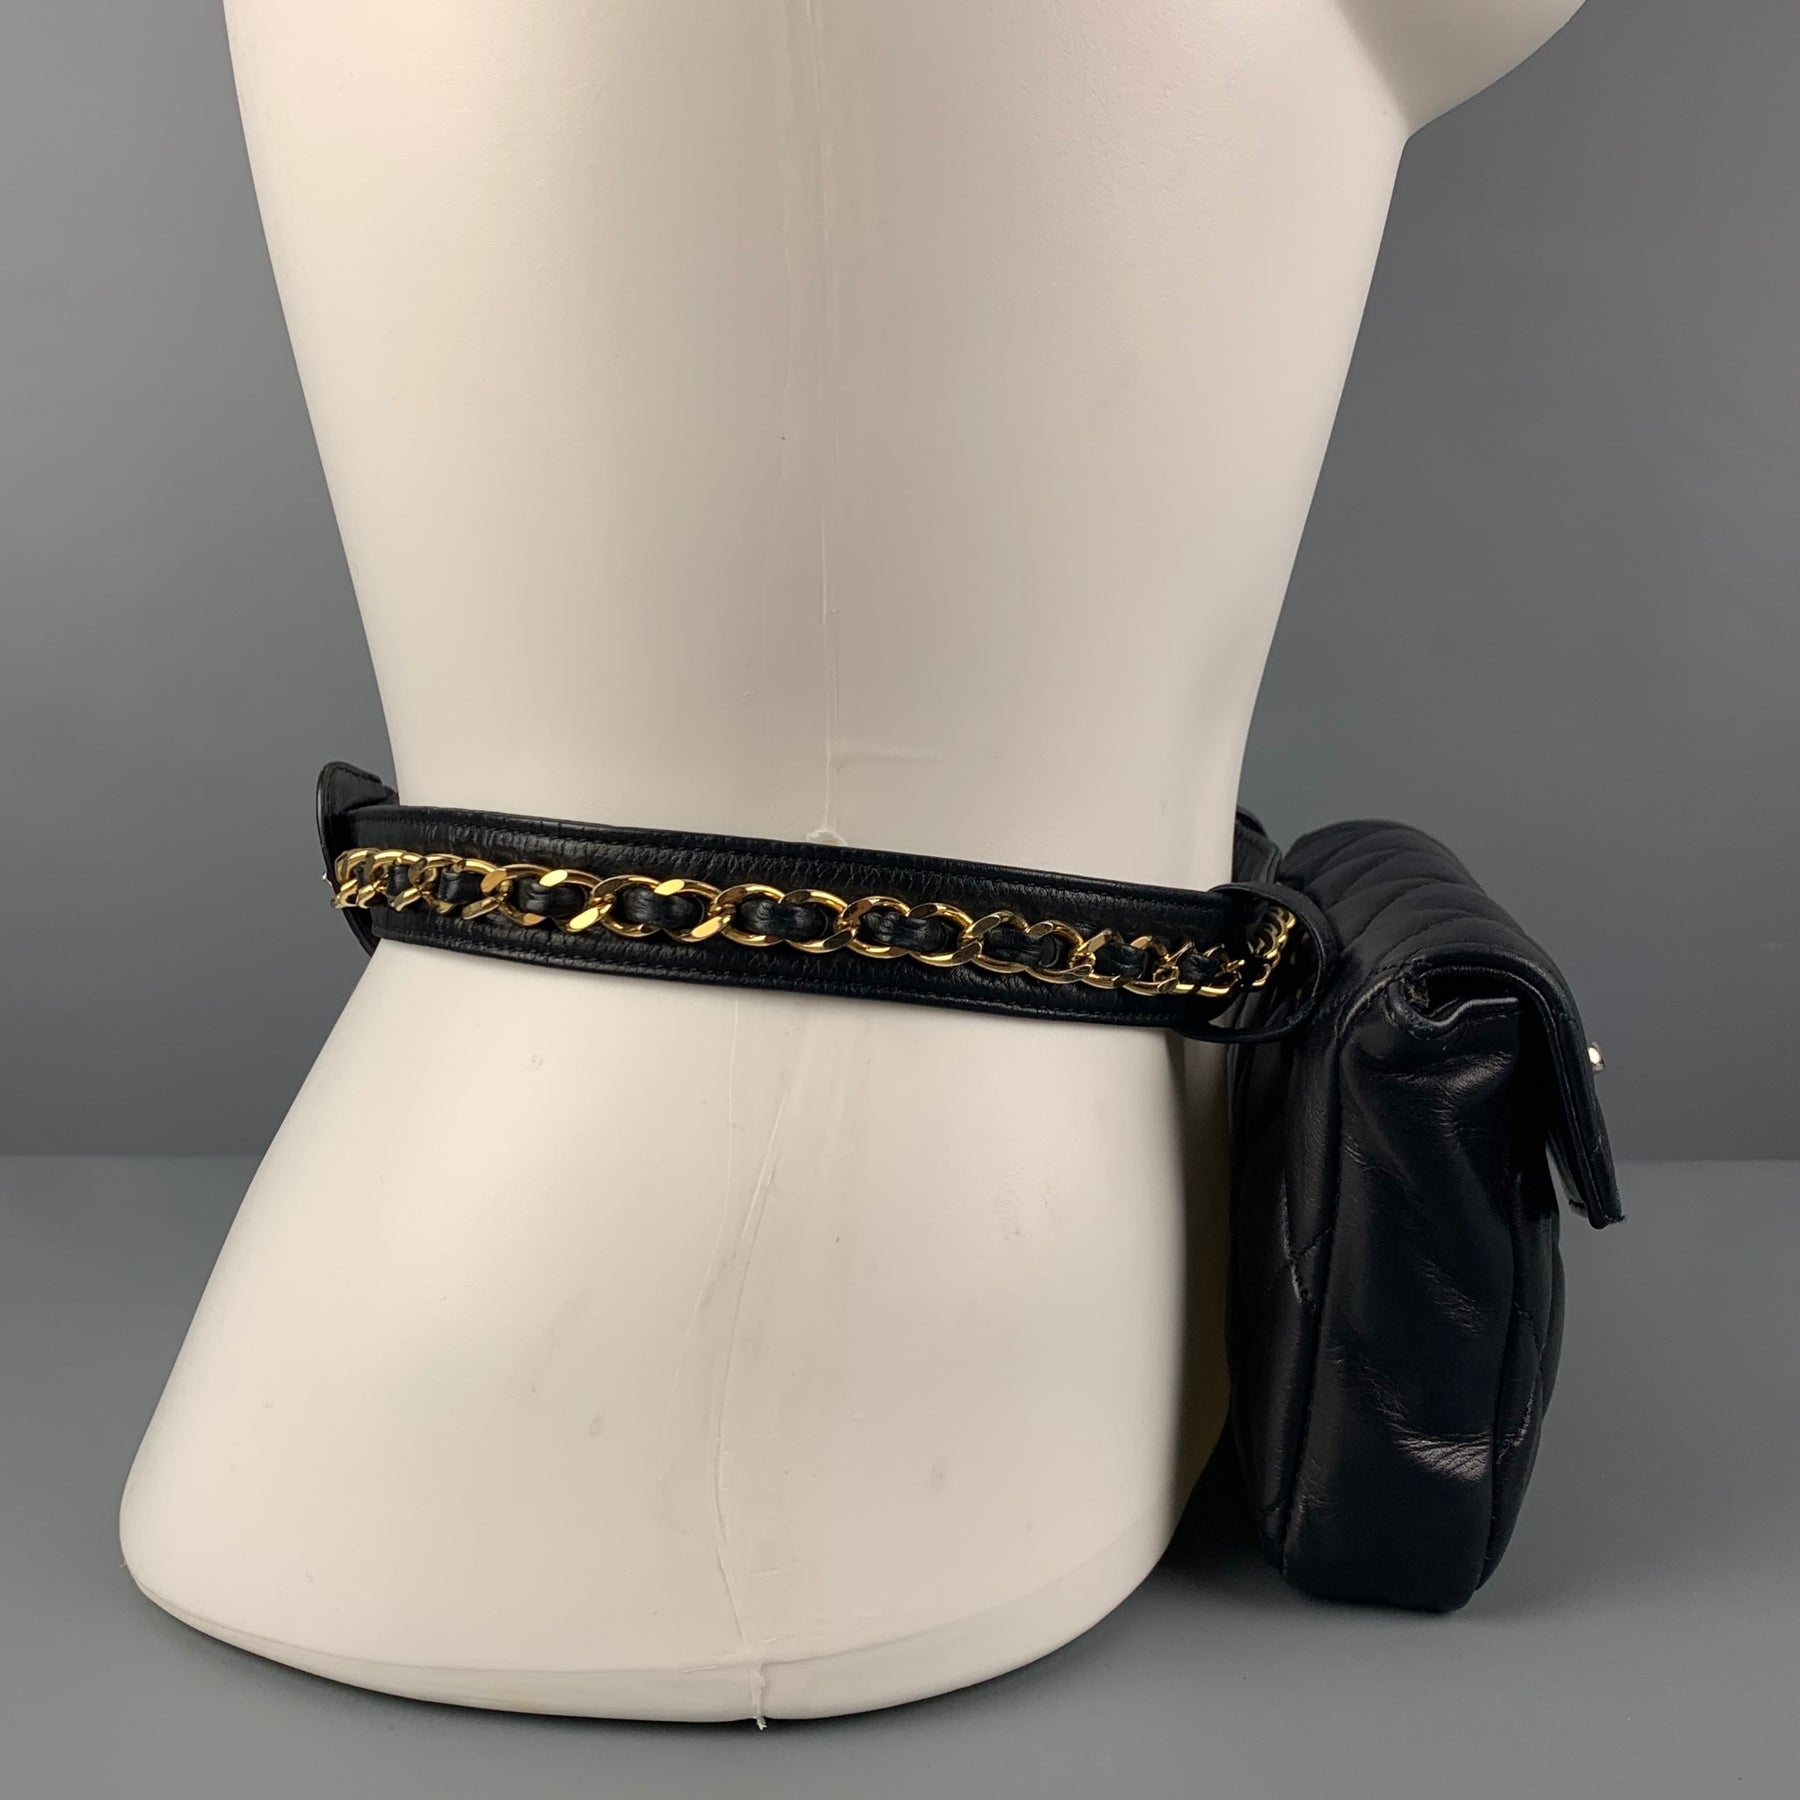 Chanel Bum Waist Collectible Rare Vintage 90's Runway Fanny Pack Belt –  House of Carver